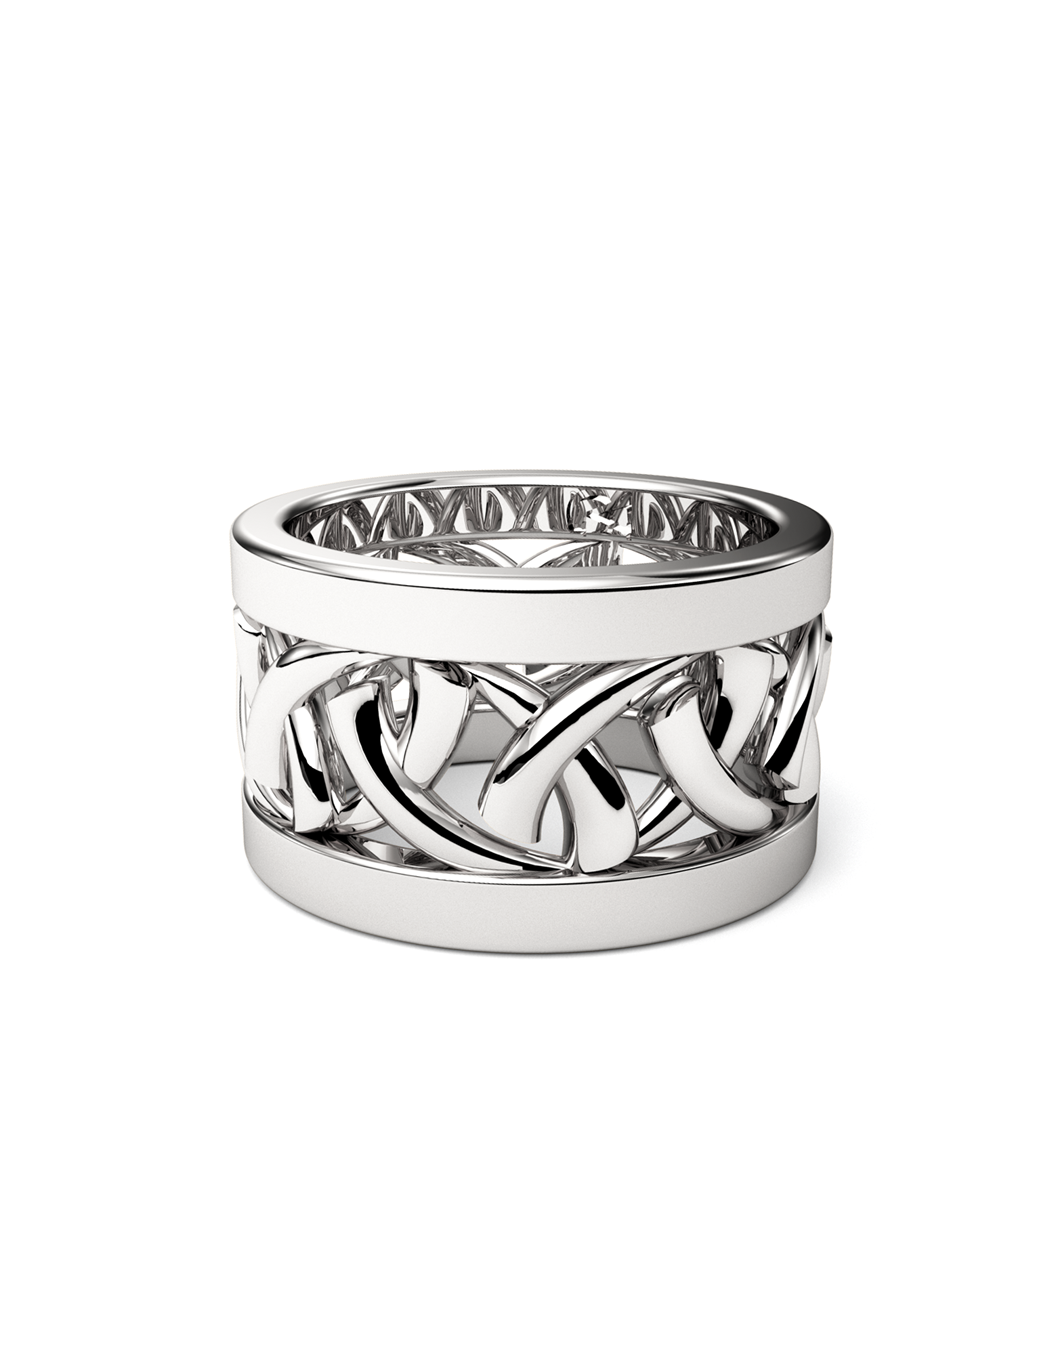 The Defender Ring